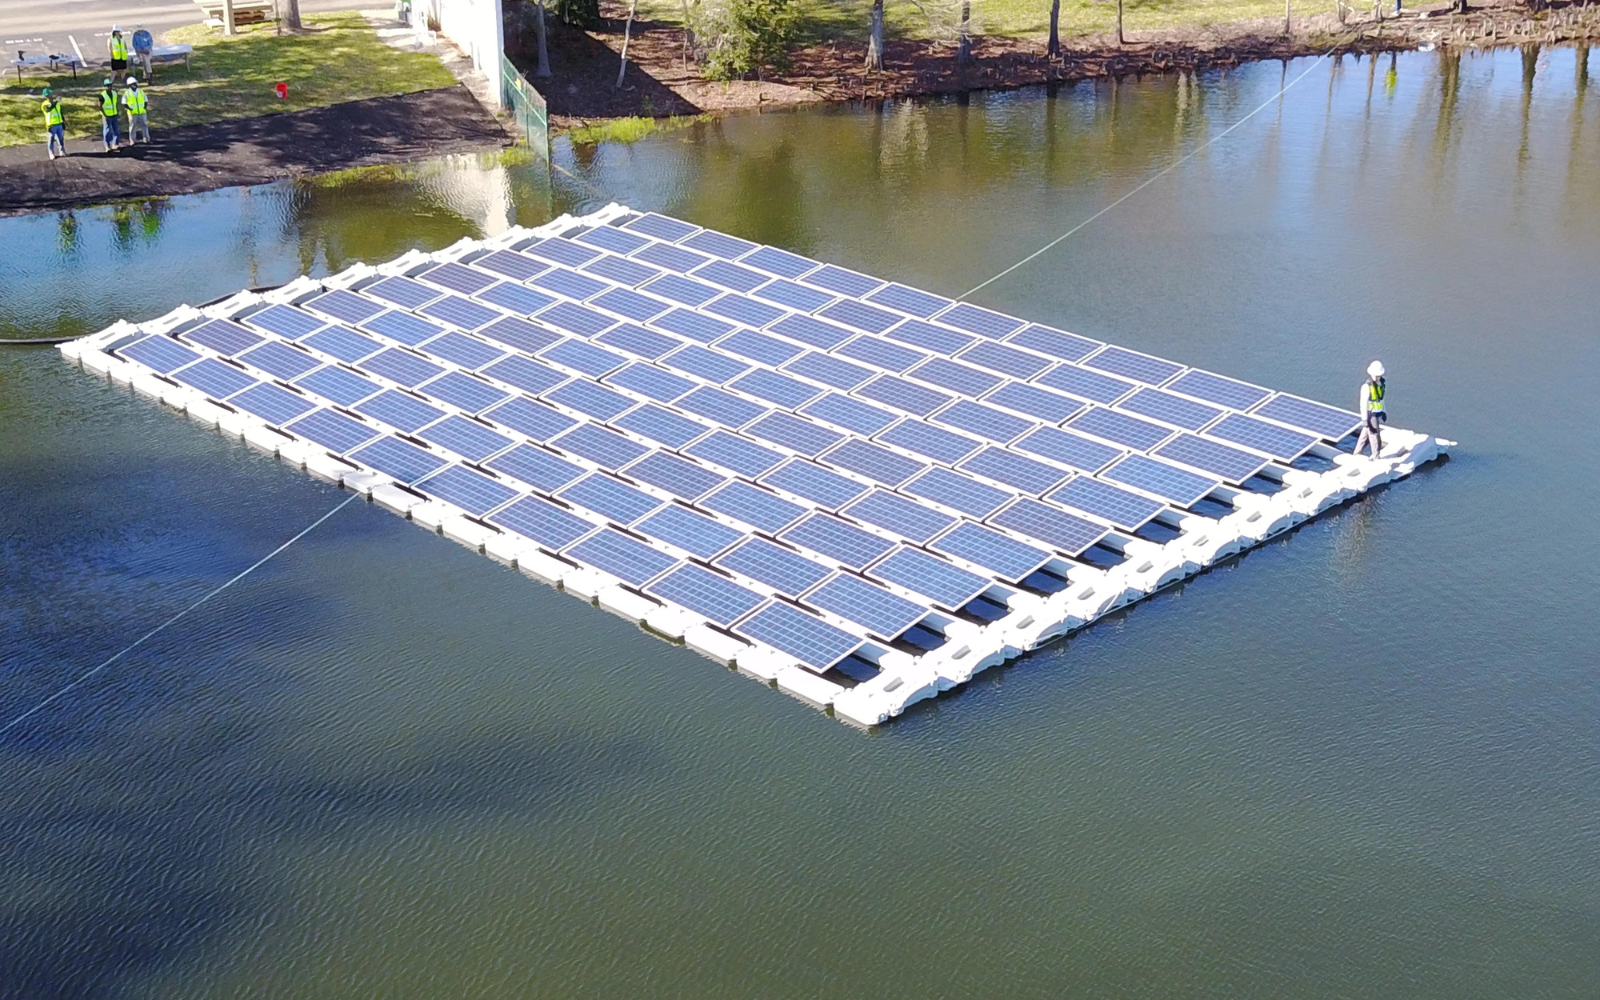 Making Waves in Solar Power